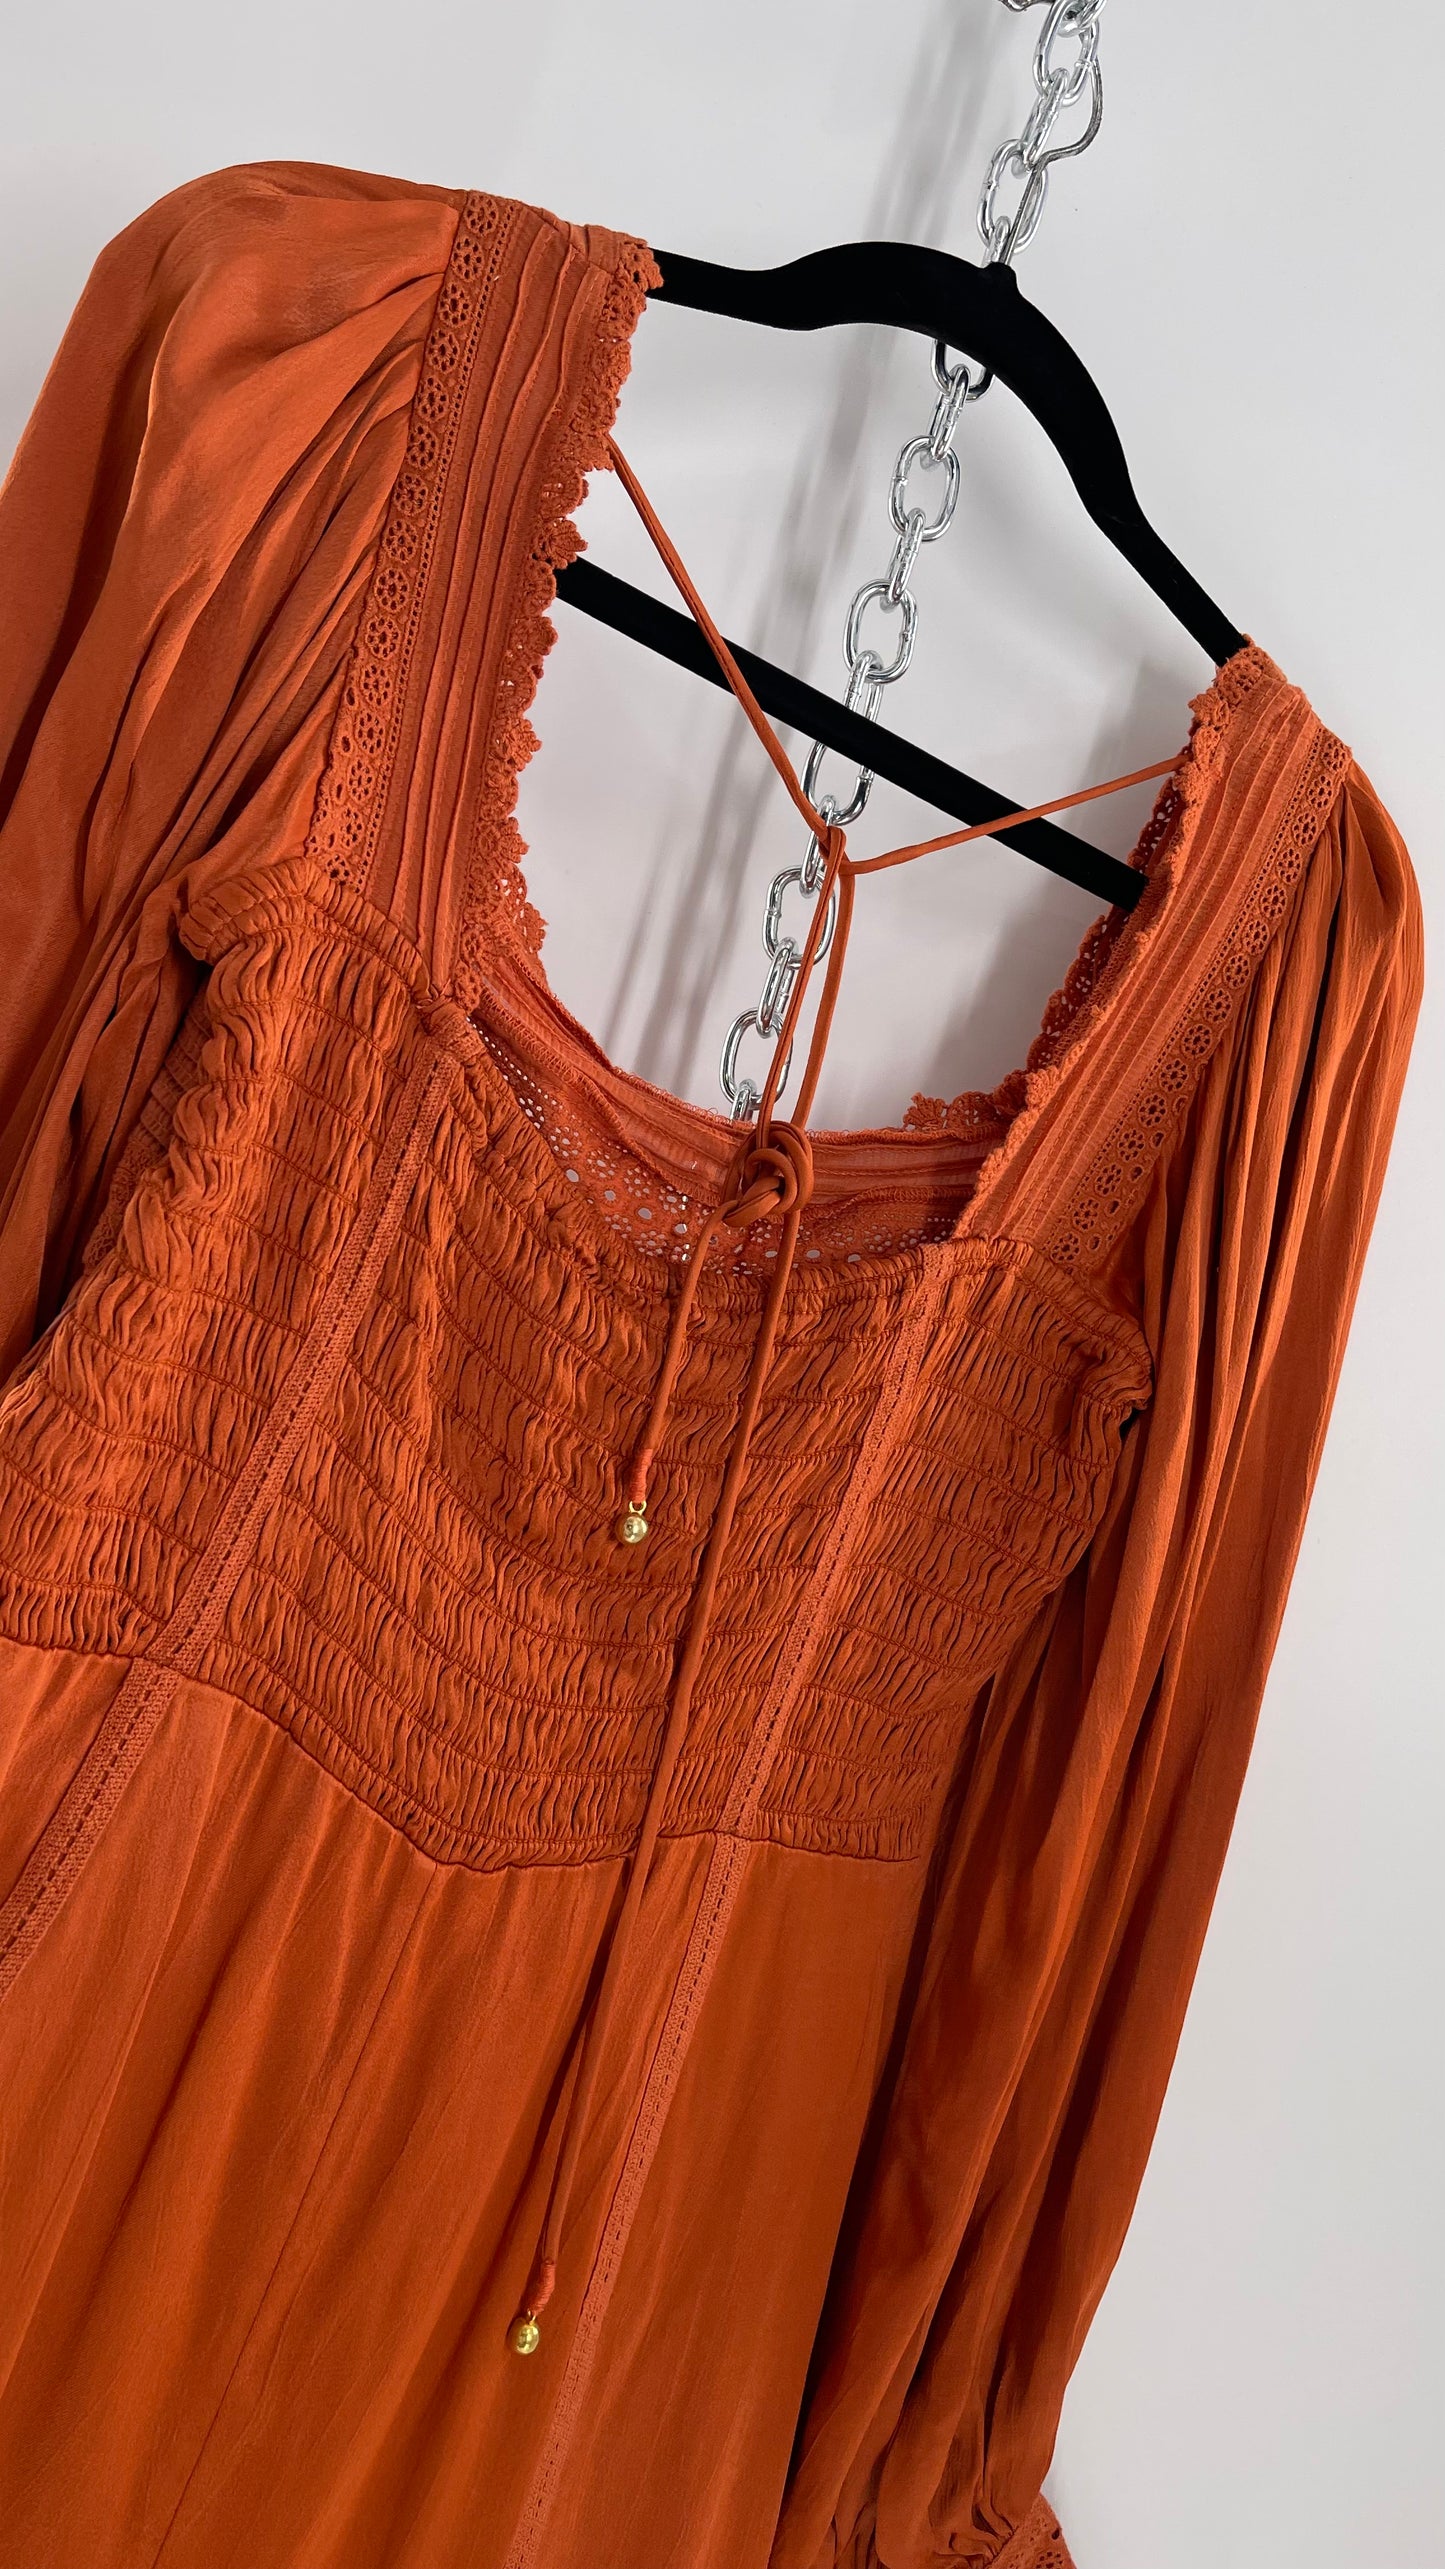 Free People Silky Orange Romper with Buttoned Sleeve Cuffs, Balloon Sleeves and Pleated Lace Bust (2)